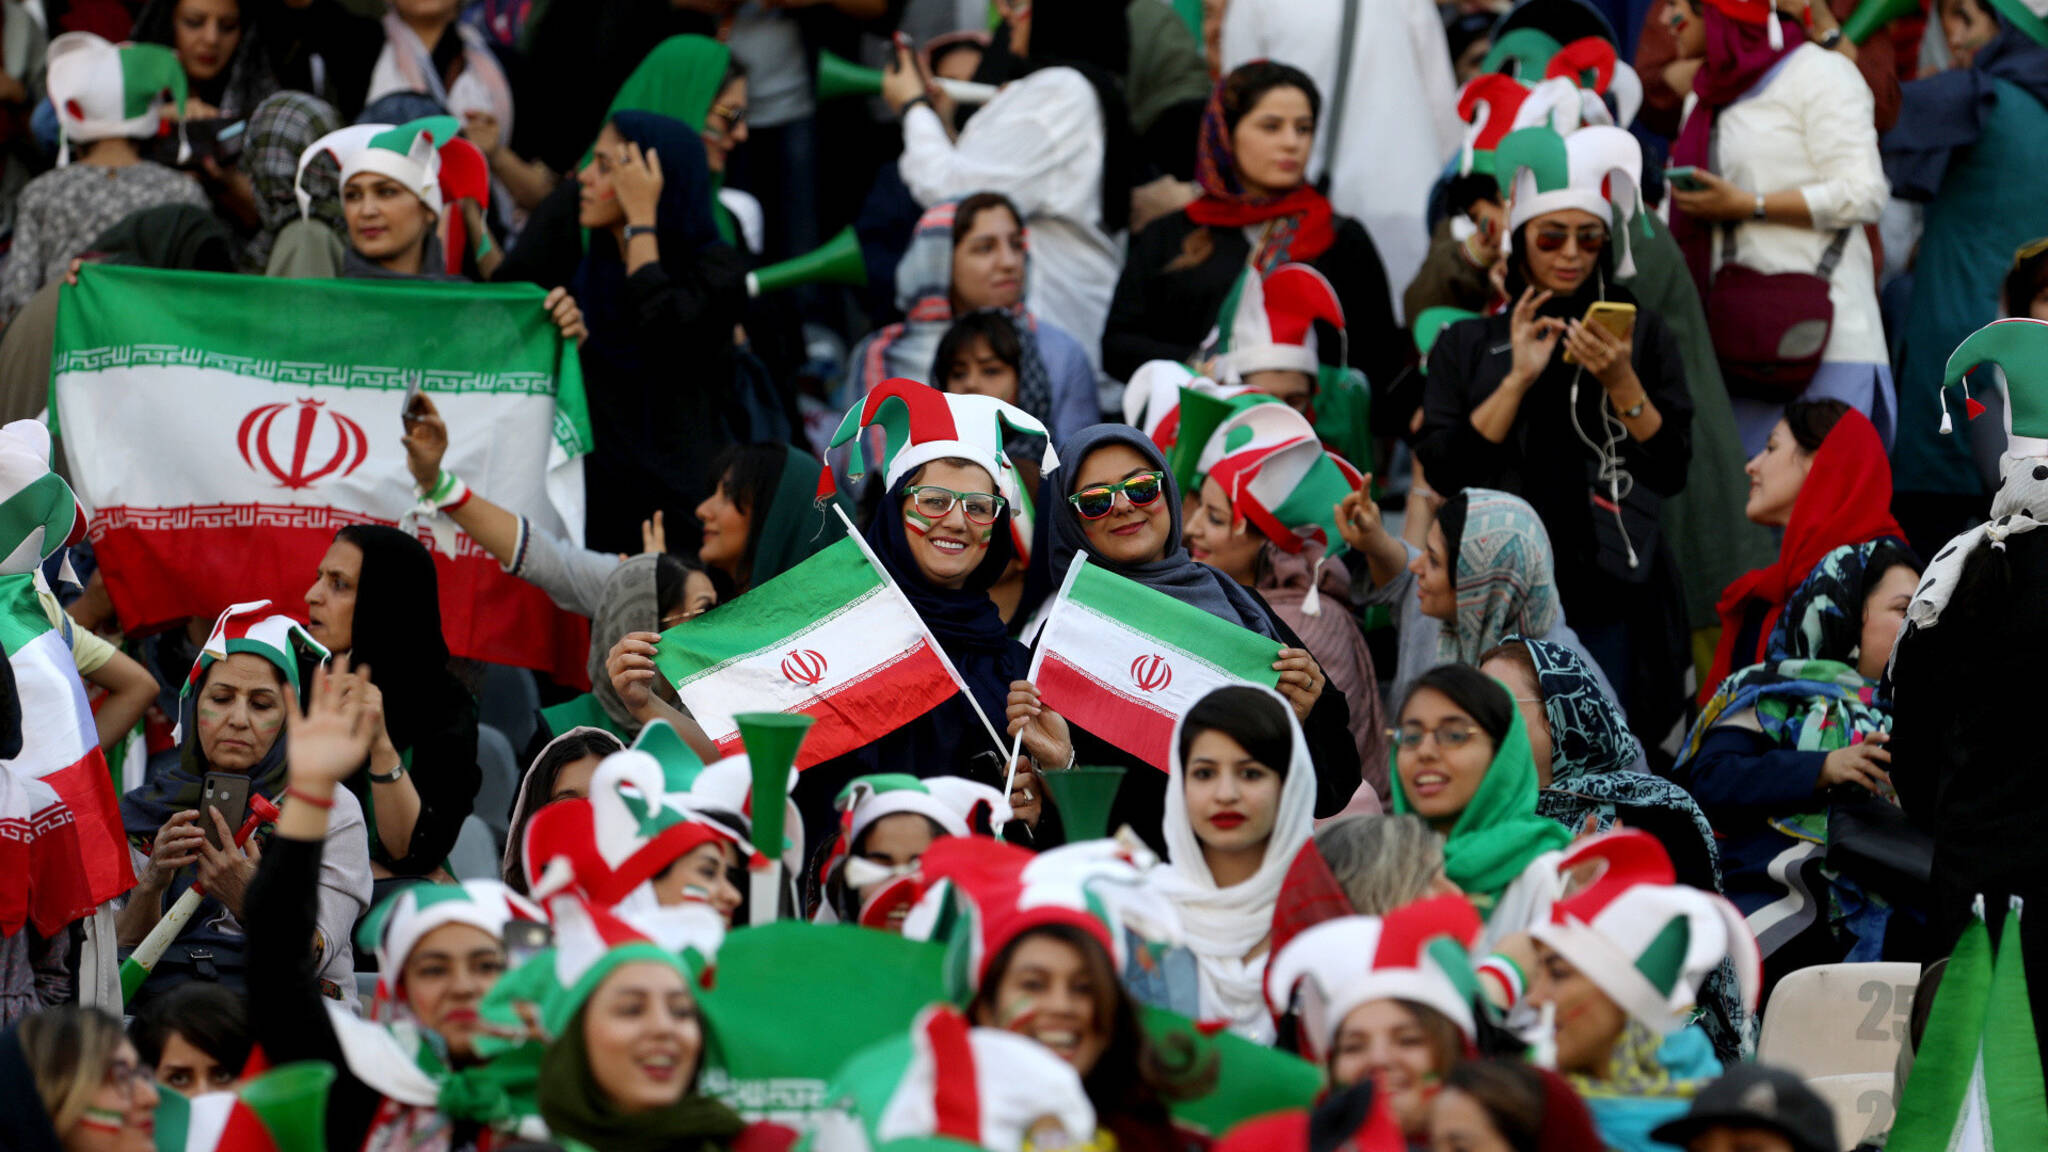 Iranian women supporters at Iran, Cambodia, photo by NOS / Marcel van der Steen